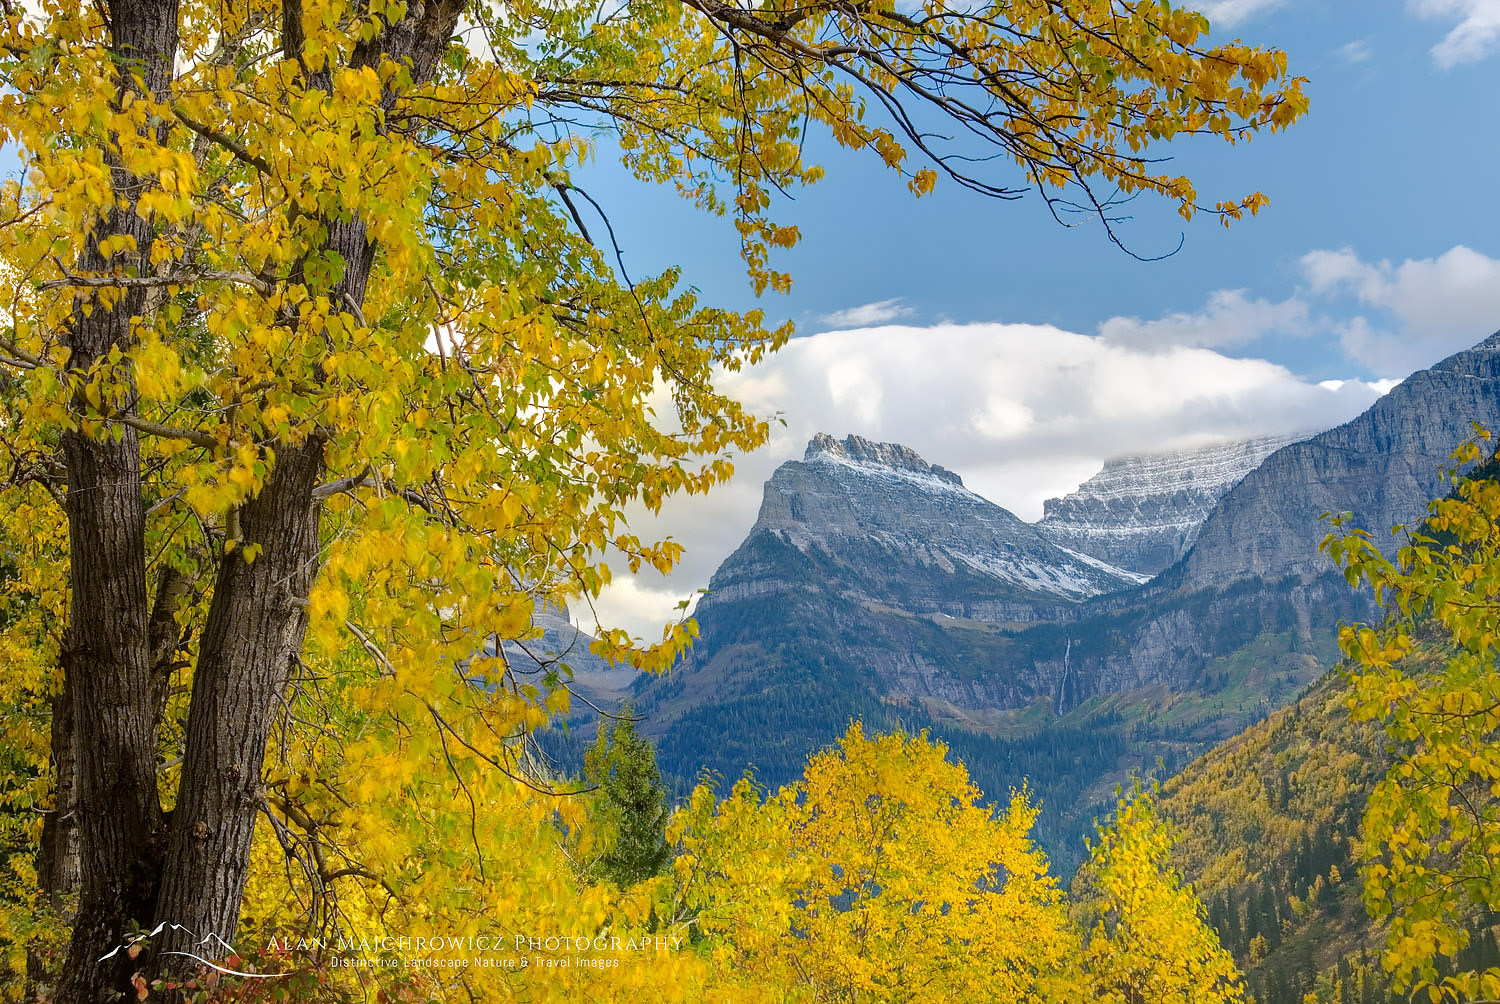 Mount Oberlin framed in the golden foliage of Cottonwood trees. Seen from yhr Going To The Sun Road in Glacier National Park Montana #20397